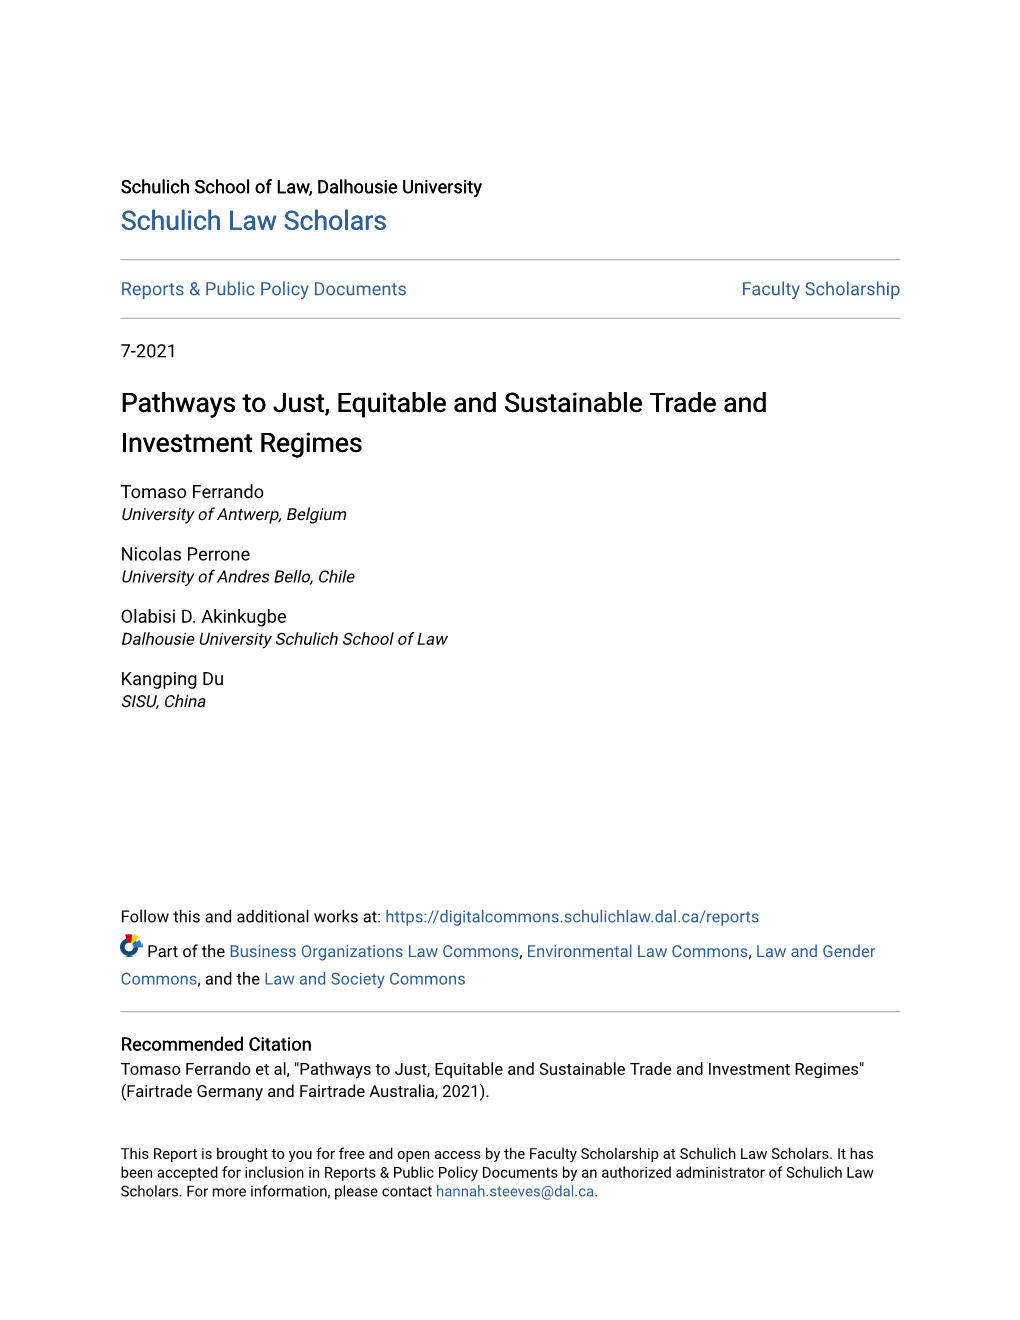 Pathways to Just, Equitable and Sustainable Trade and Investment Regimes